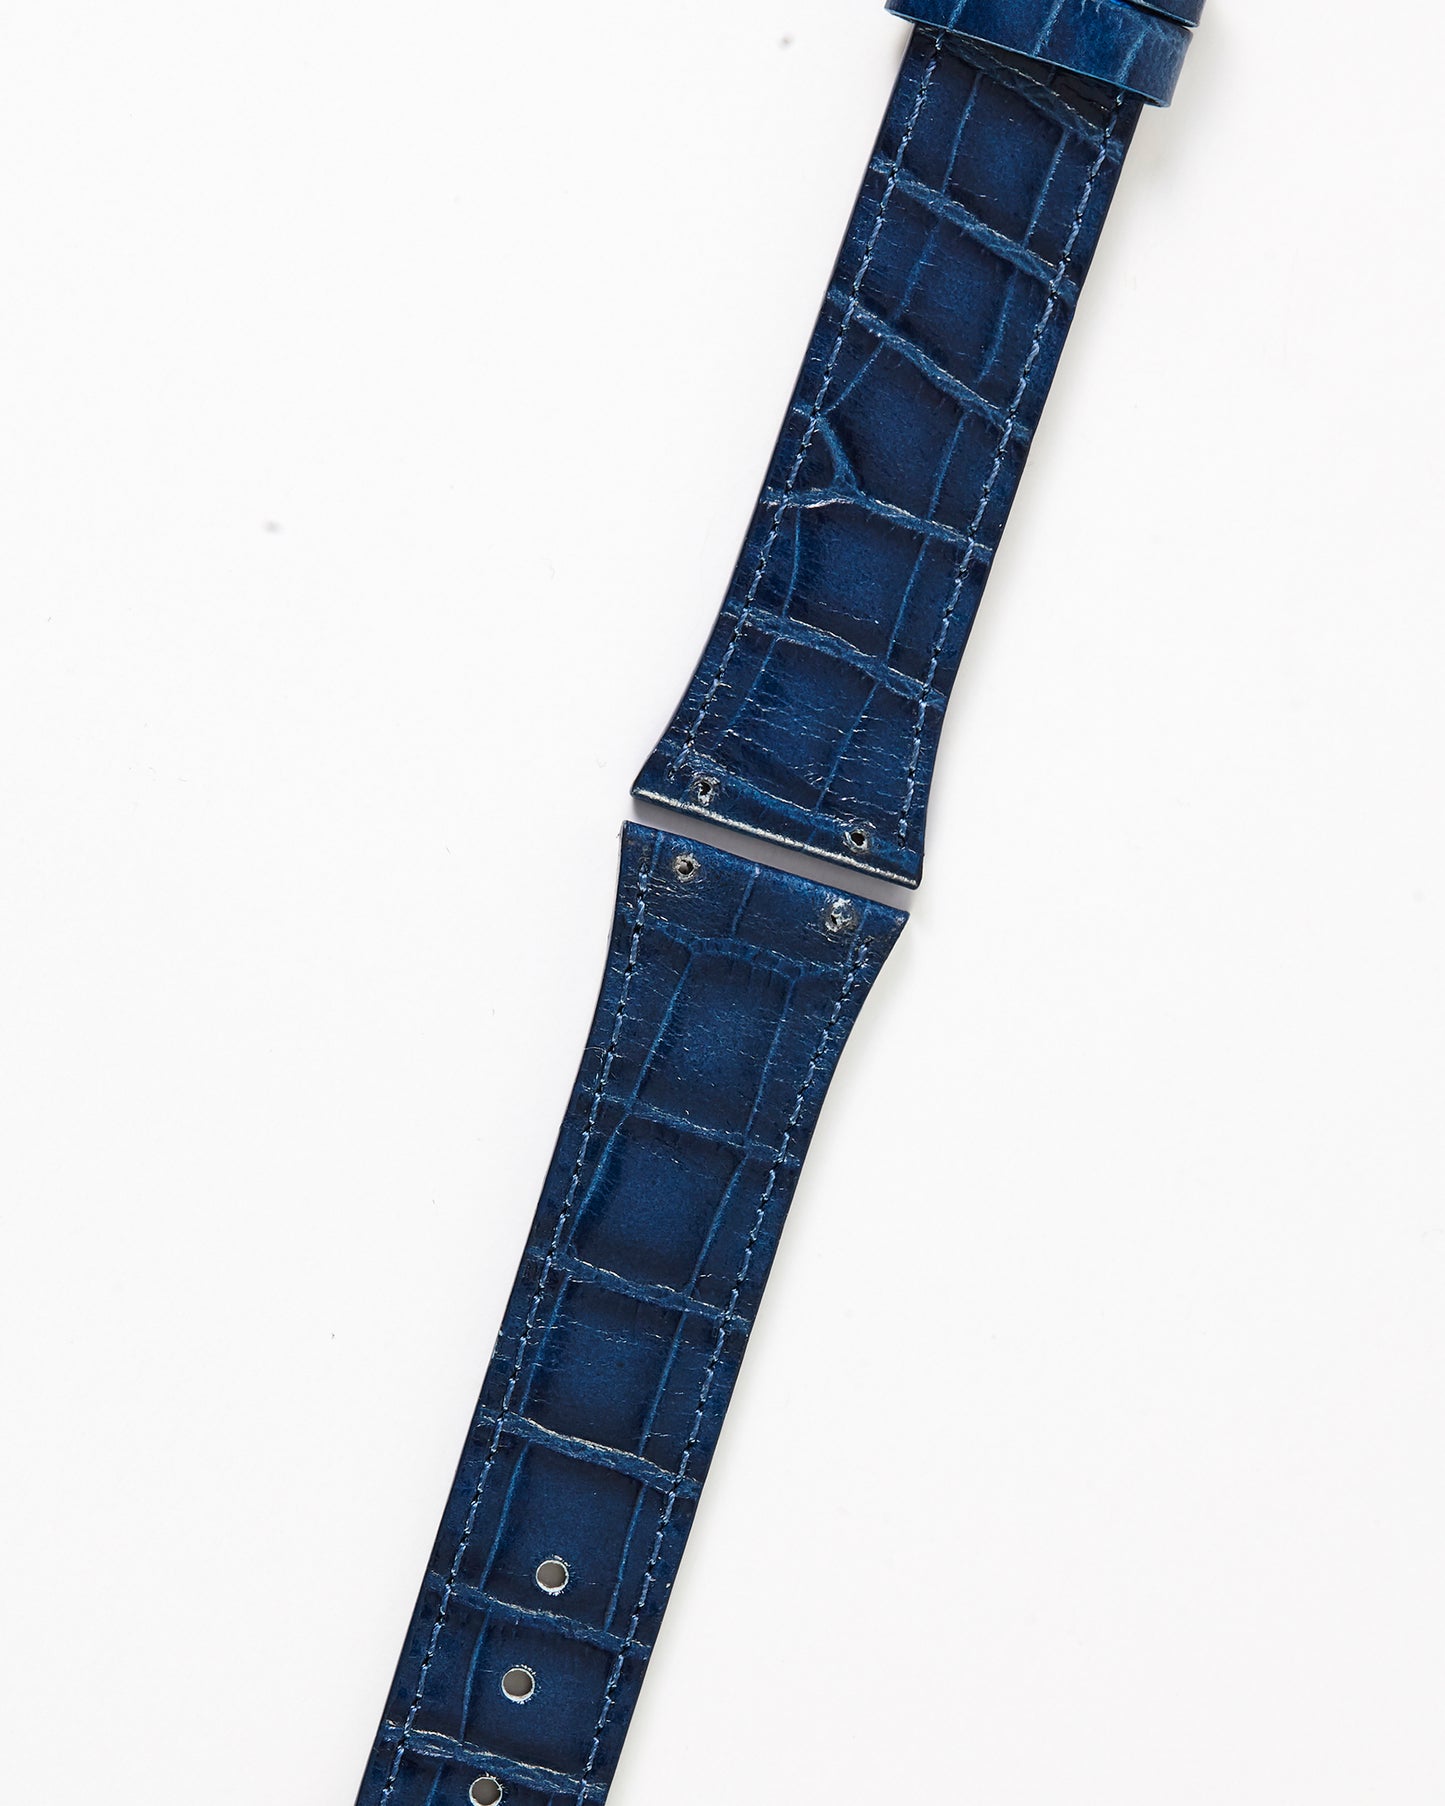 Ecclissi 10456 Blue Alligator Grain Leather Strap 20mm x 16mm with screw holes